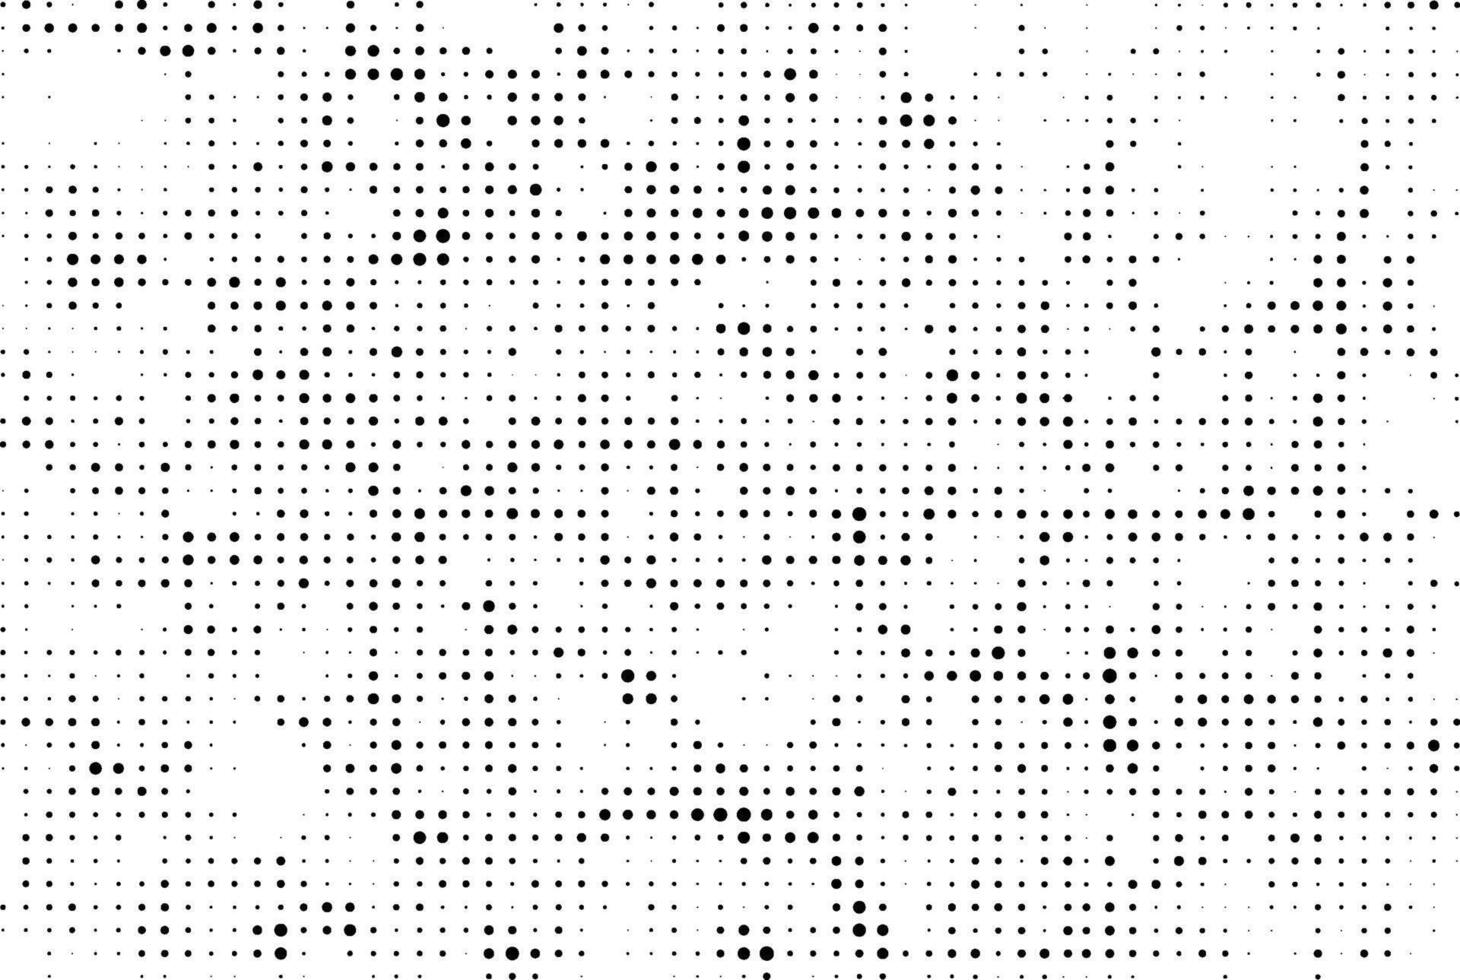 a black and white dotted background with small dots, Vintage halftone dot pattern background, a black and white halftone gradient texture, a black and white halftone dot pattern,  grunge dot vector